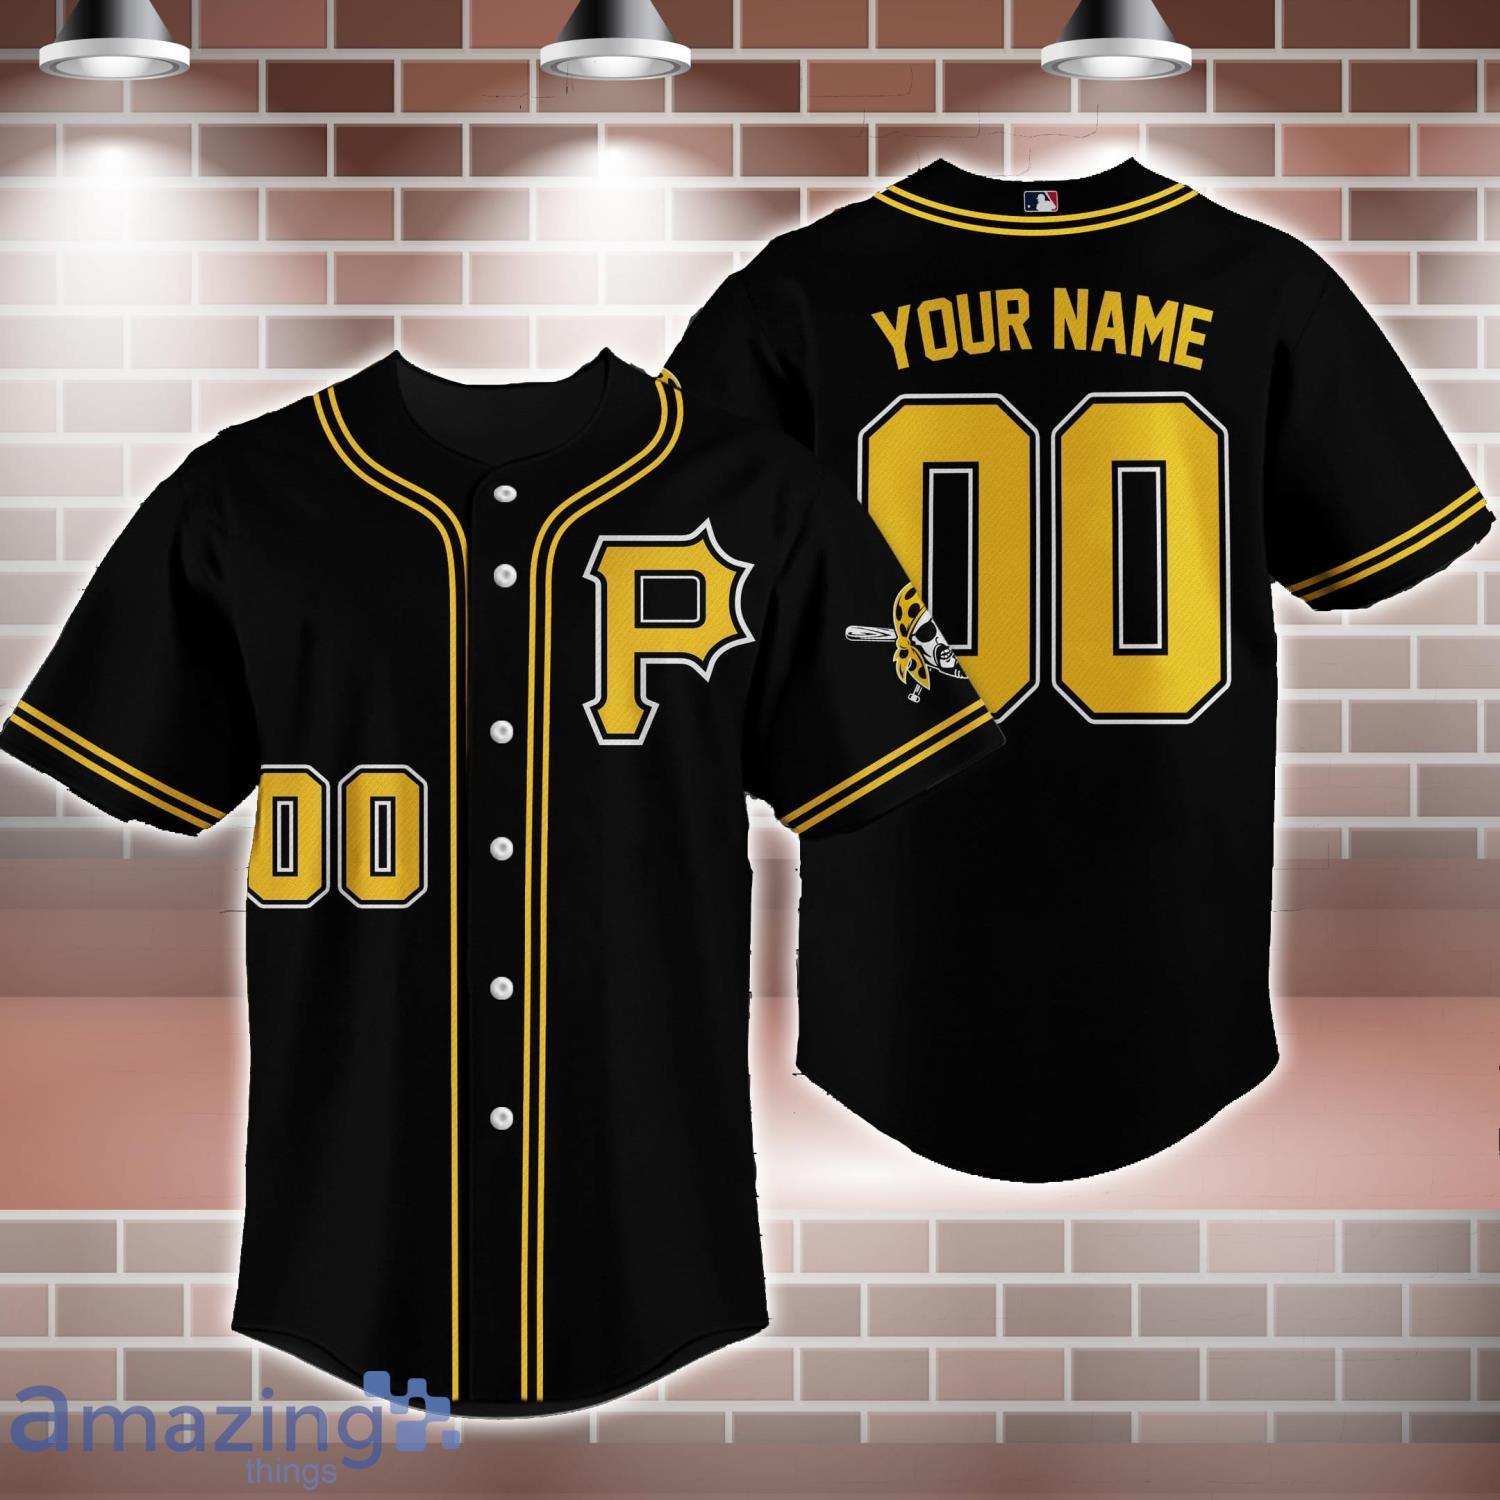 Pittsburgh Pirates Size XL MLB Jerseys for sale